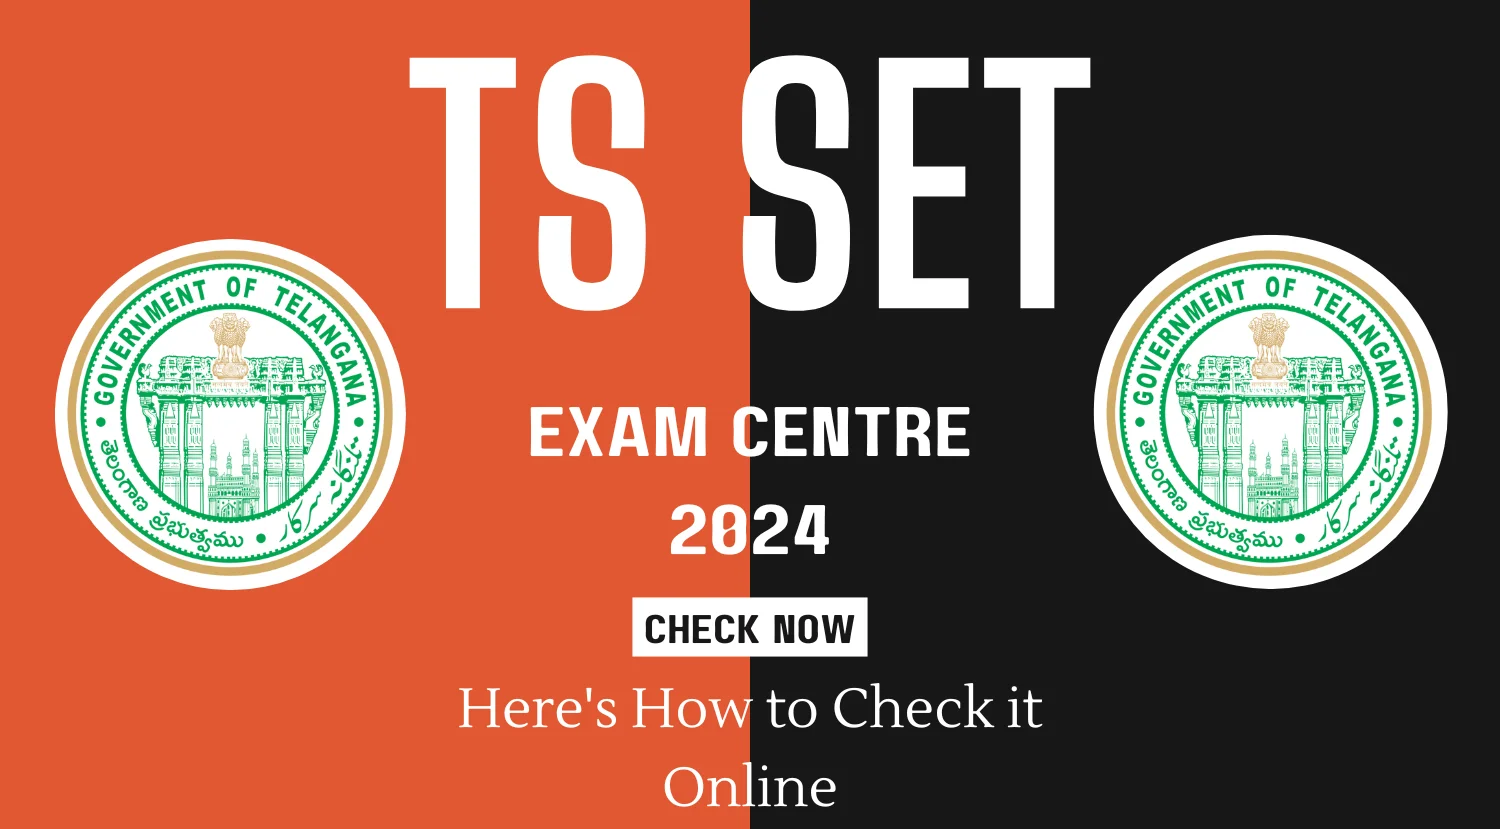 TS SET Exam Centre 2024 Heres How to Check it Online